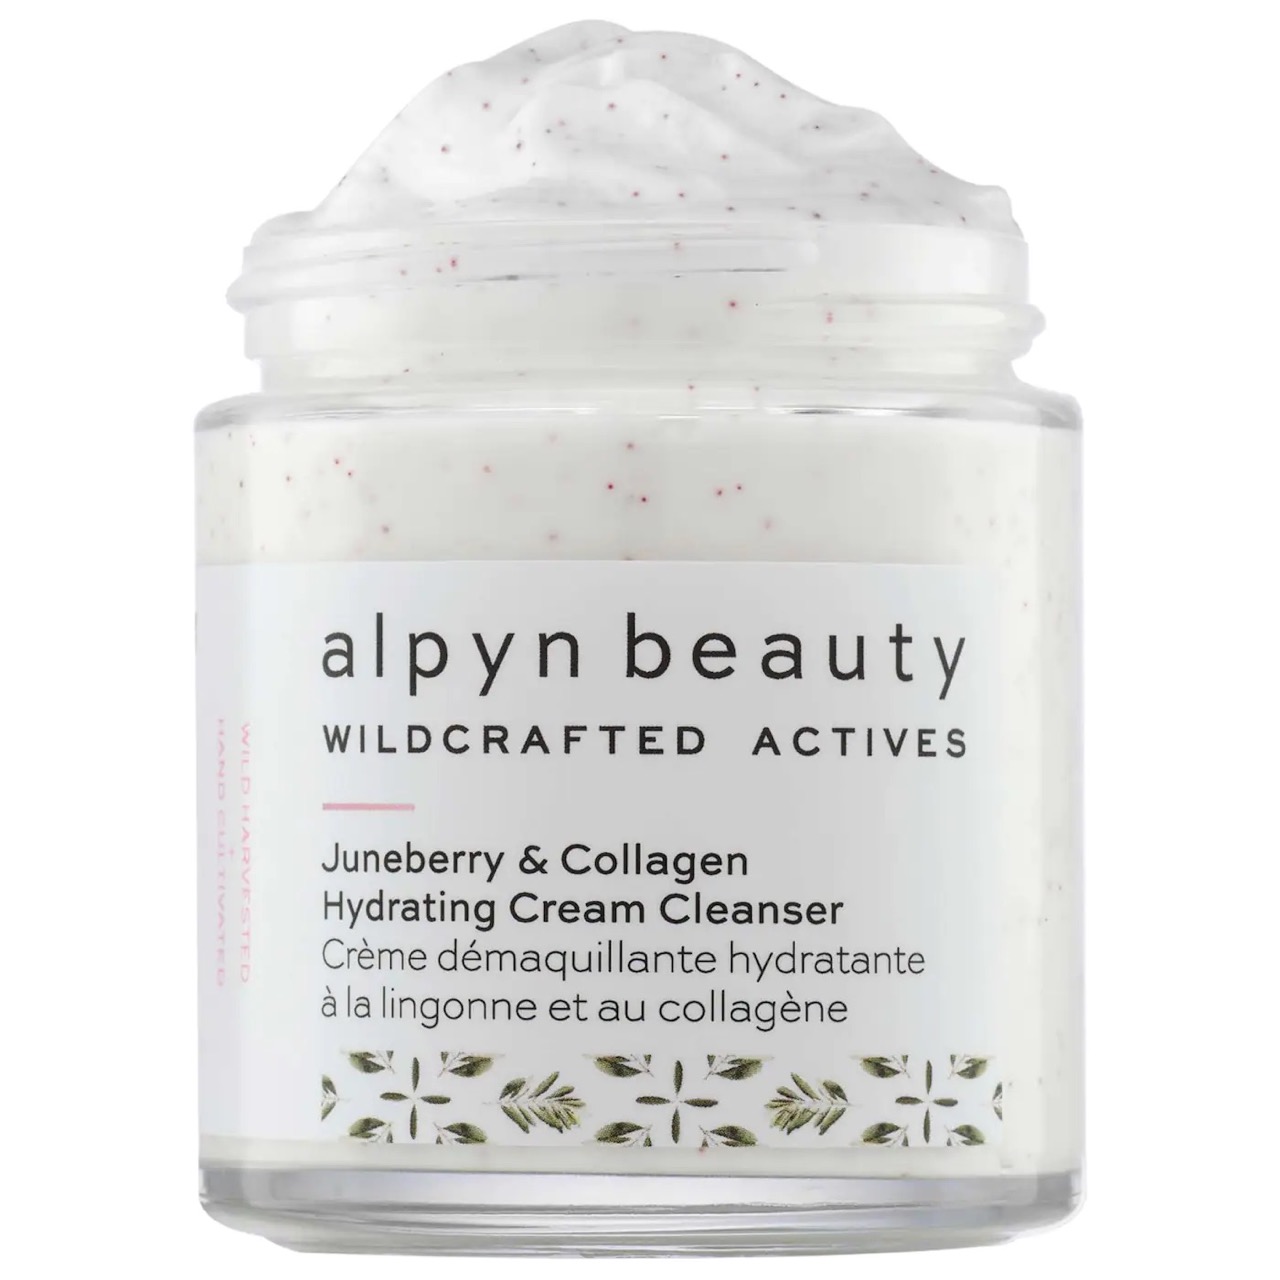 A jar of Alpyn Beauty Juneberry & Collagen Hydrating Cold Cream Cleanser.